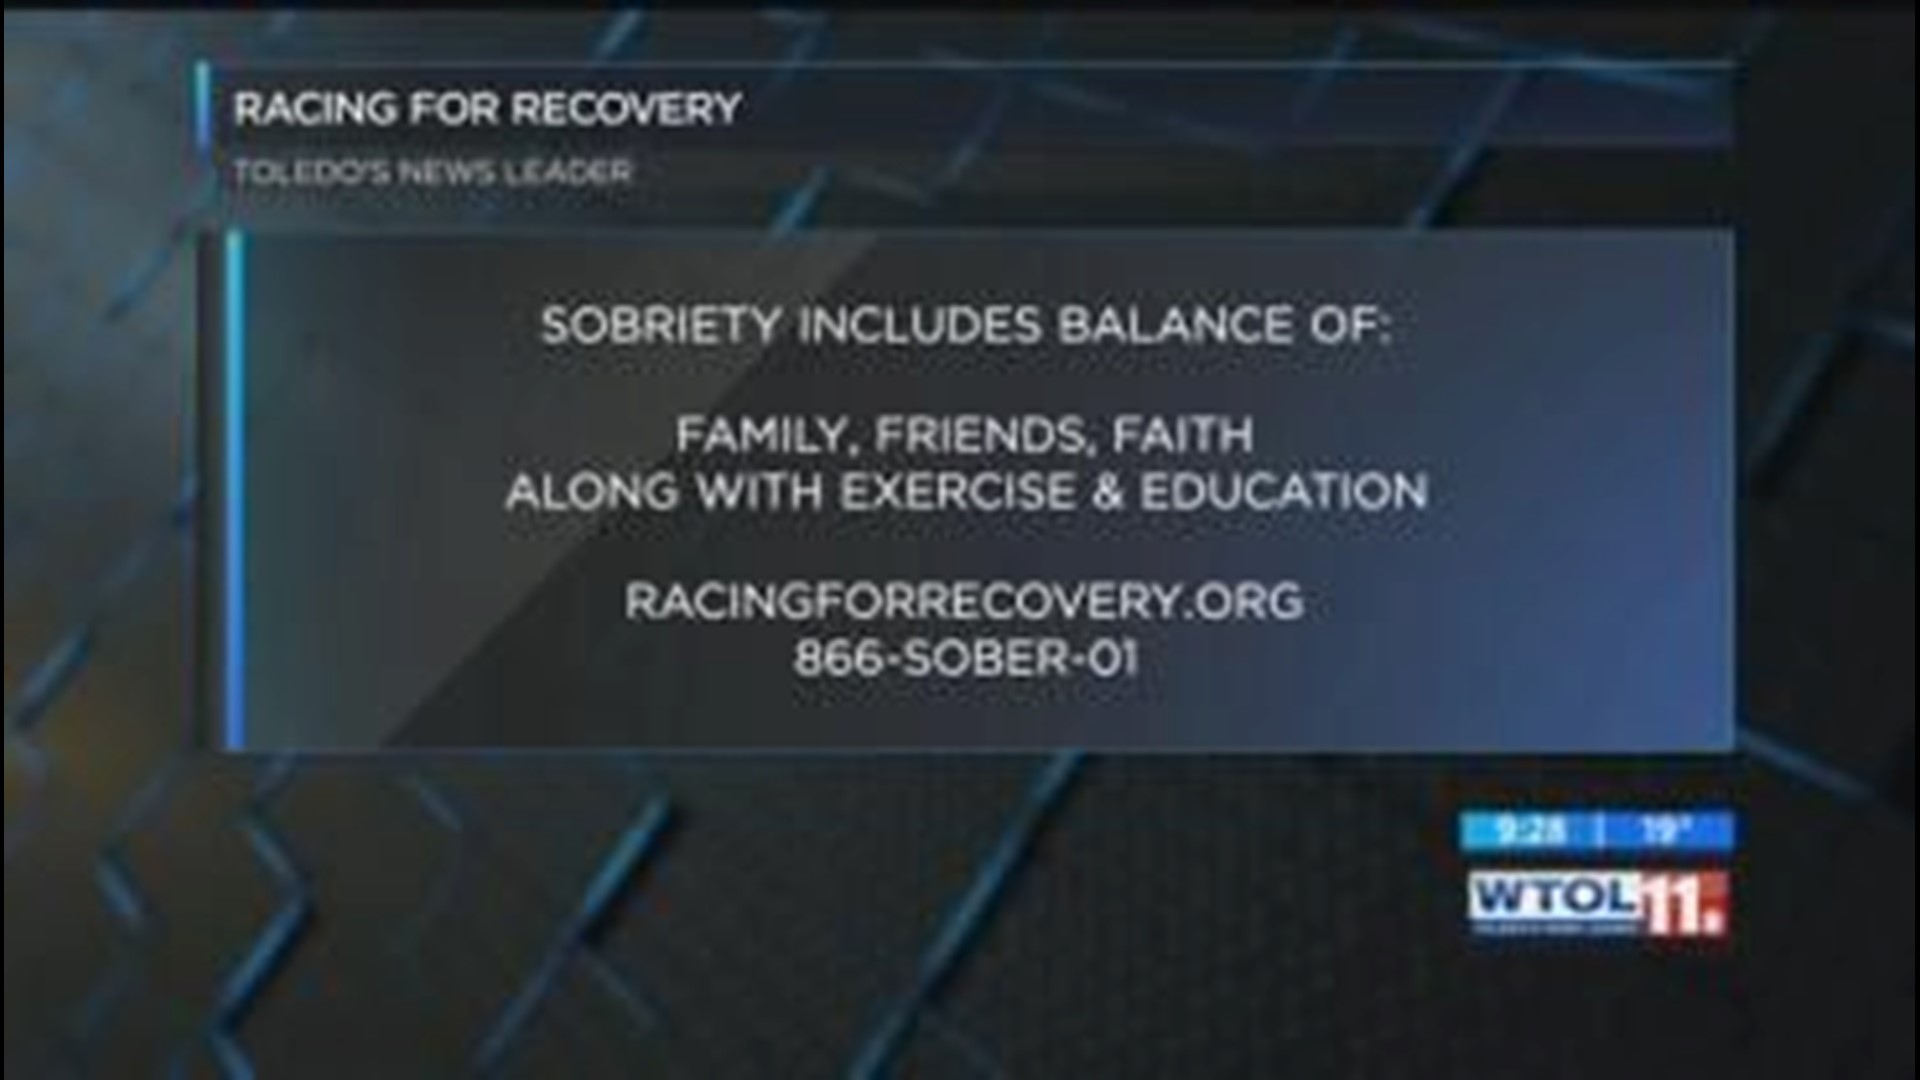 Racing for Recovery's Todd Crandall gives advice to those struggling over the holidays